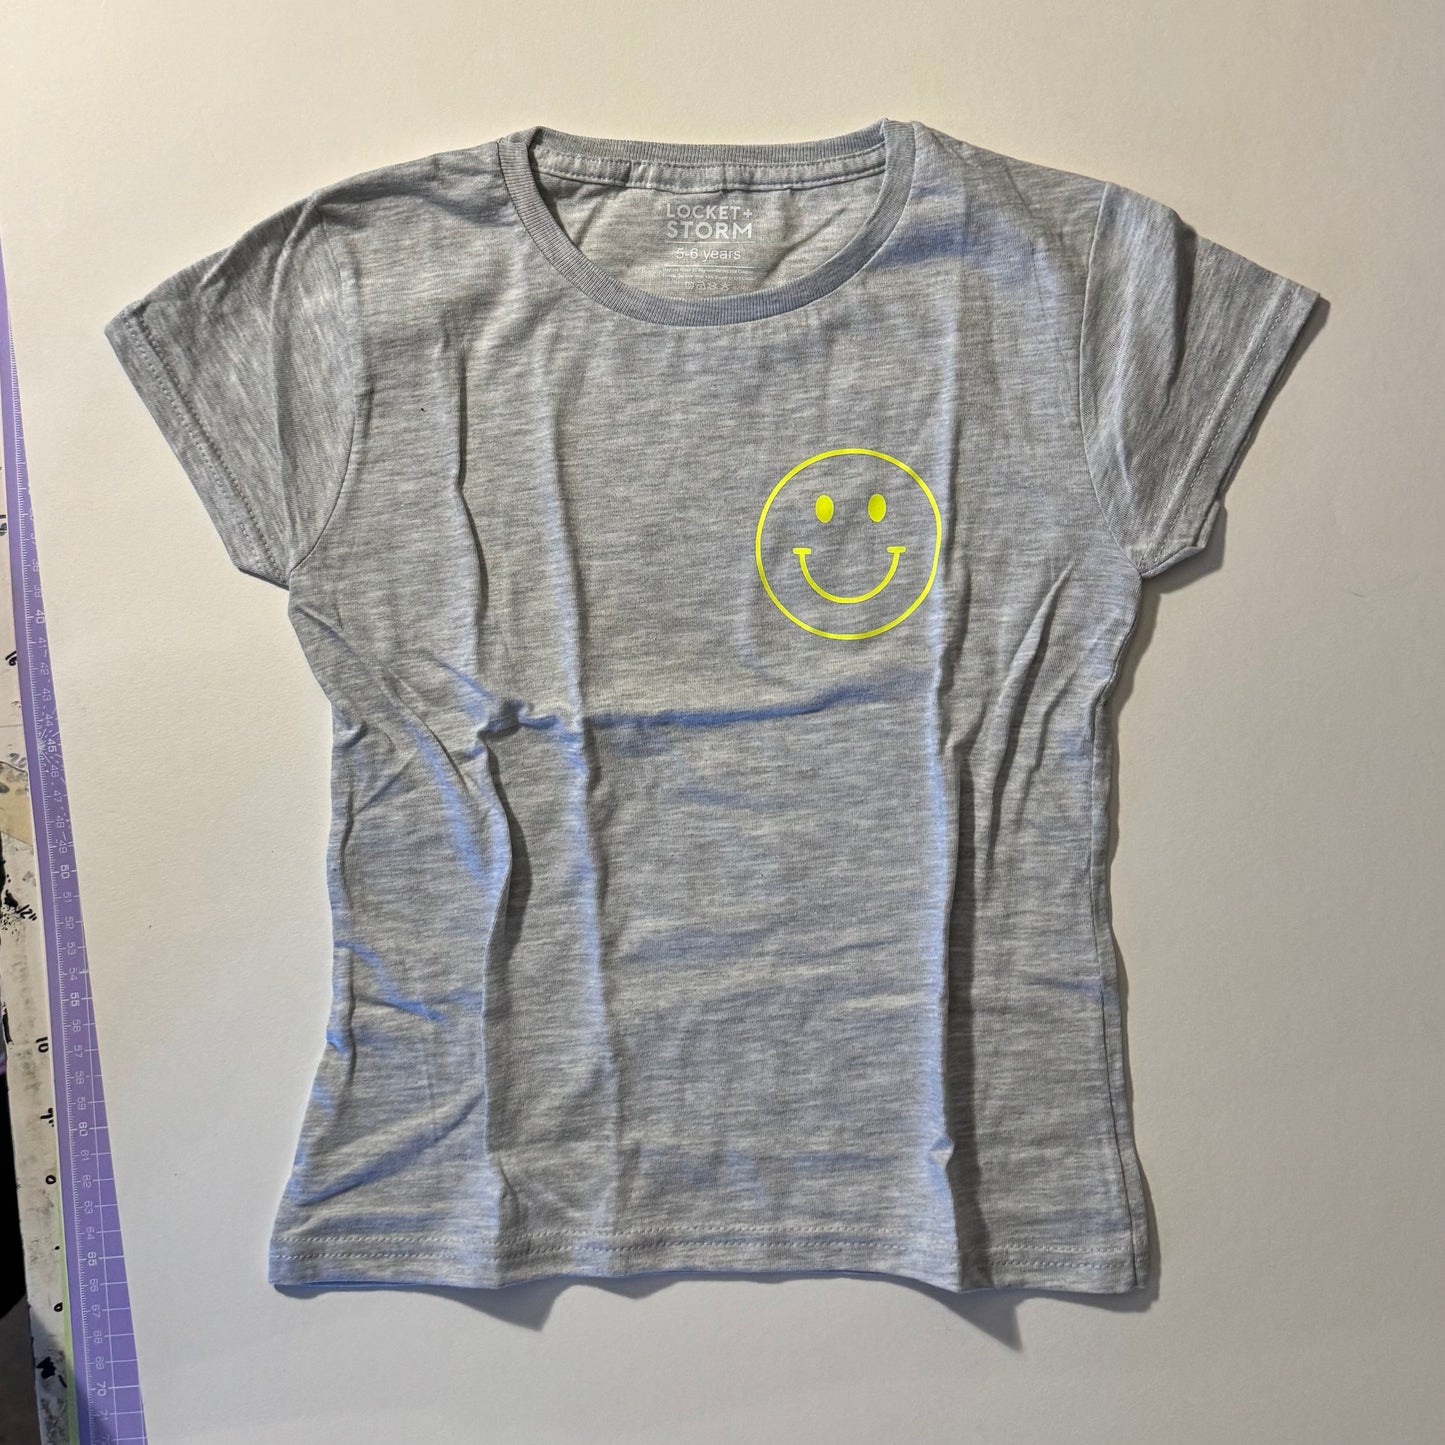 SALE Kids Smiley Face T-Shirt - 5-6 years